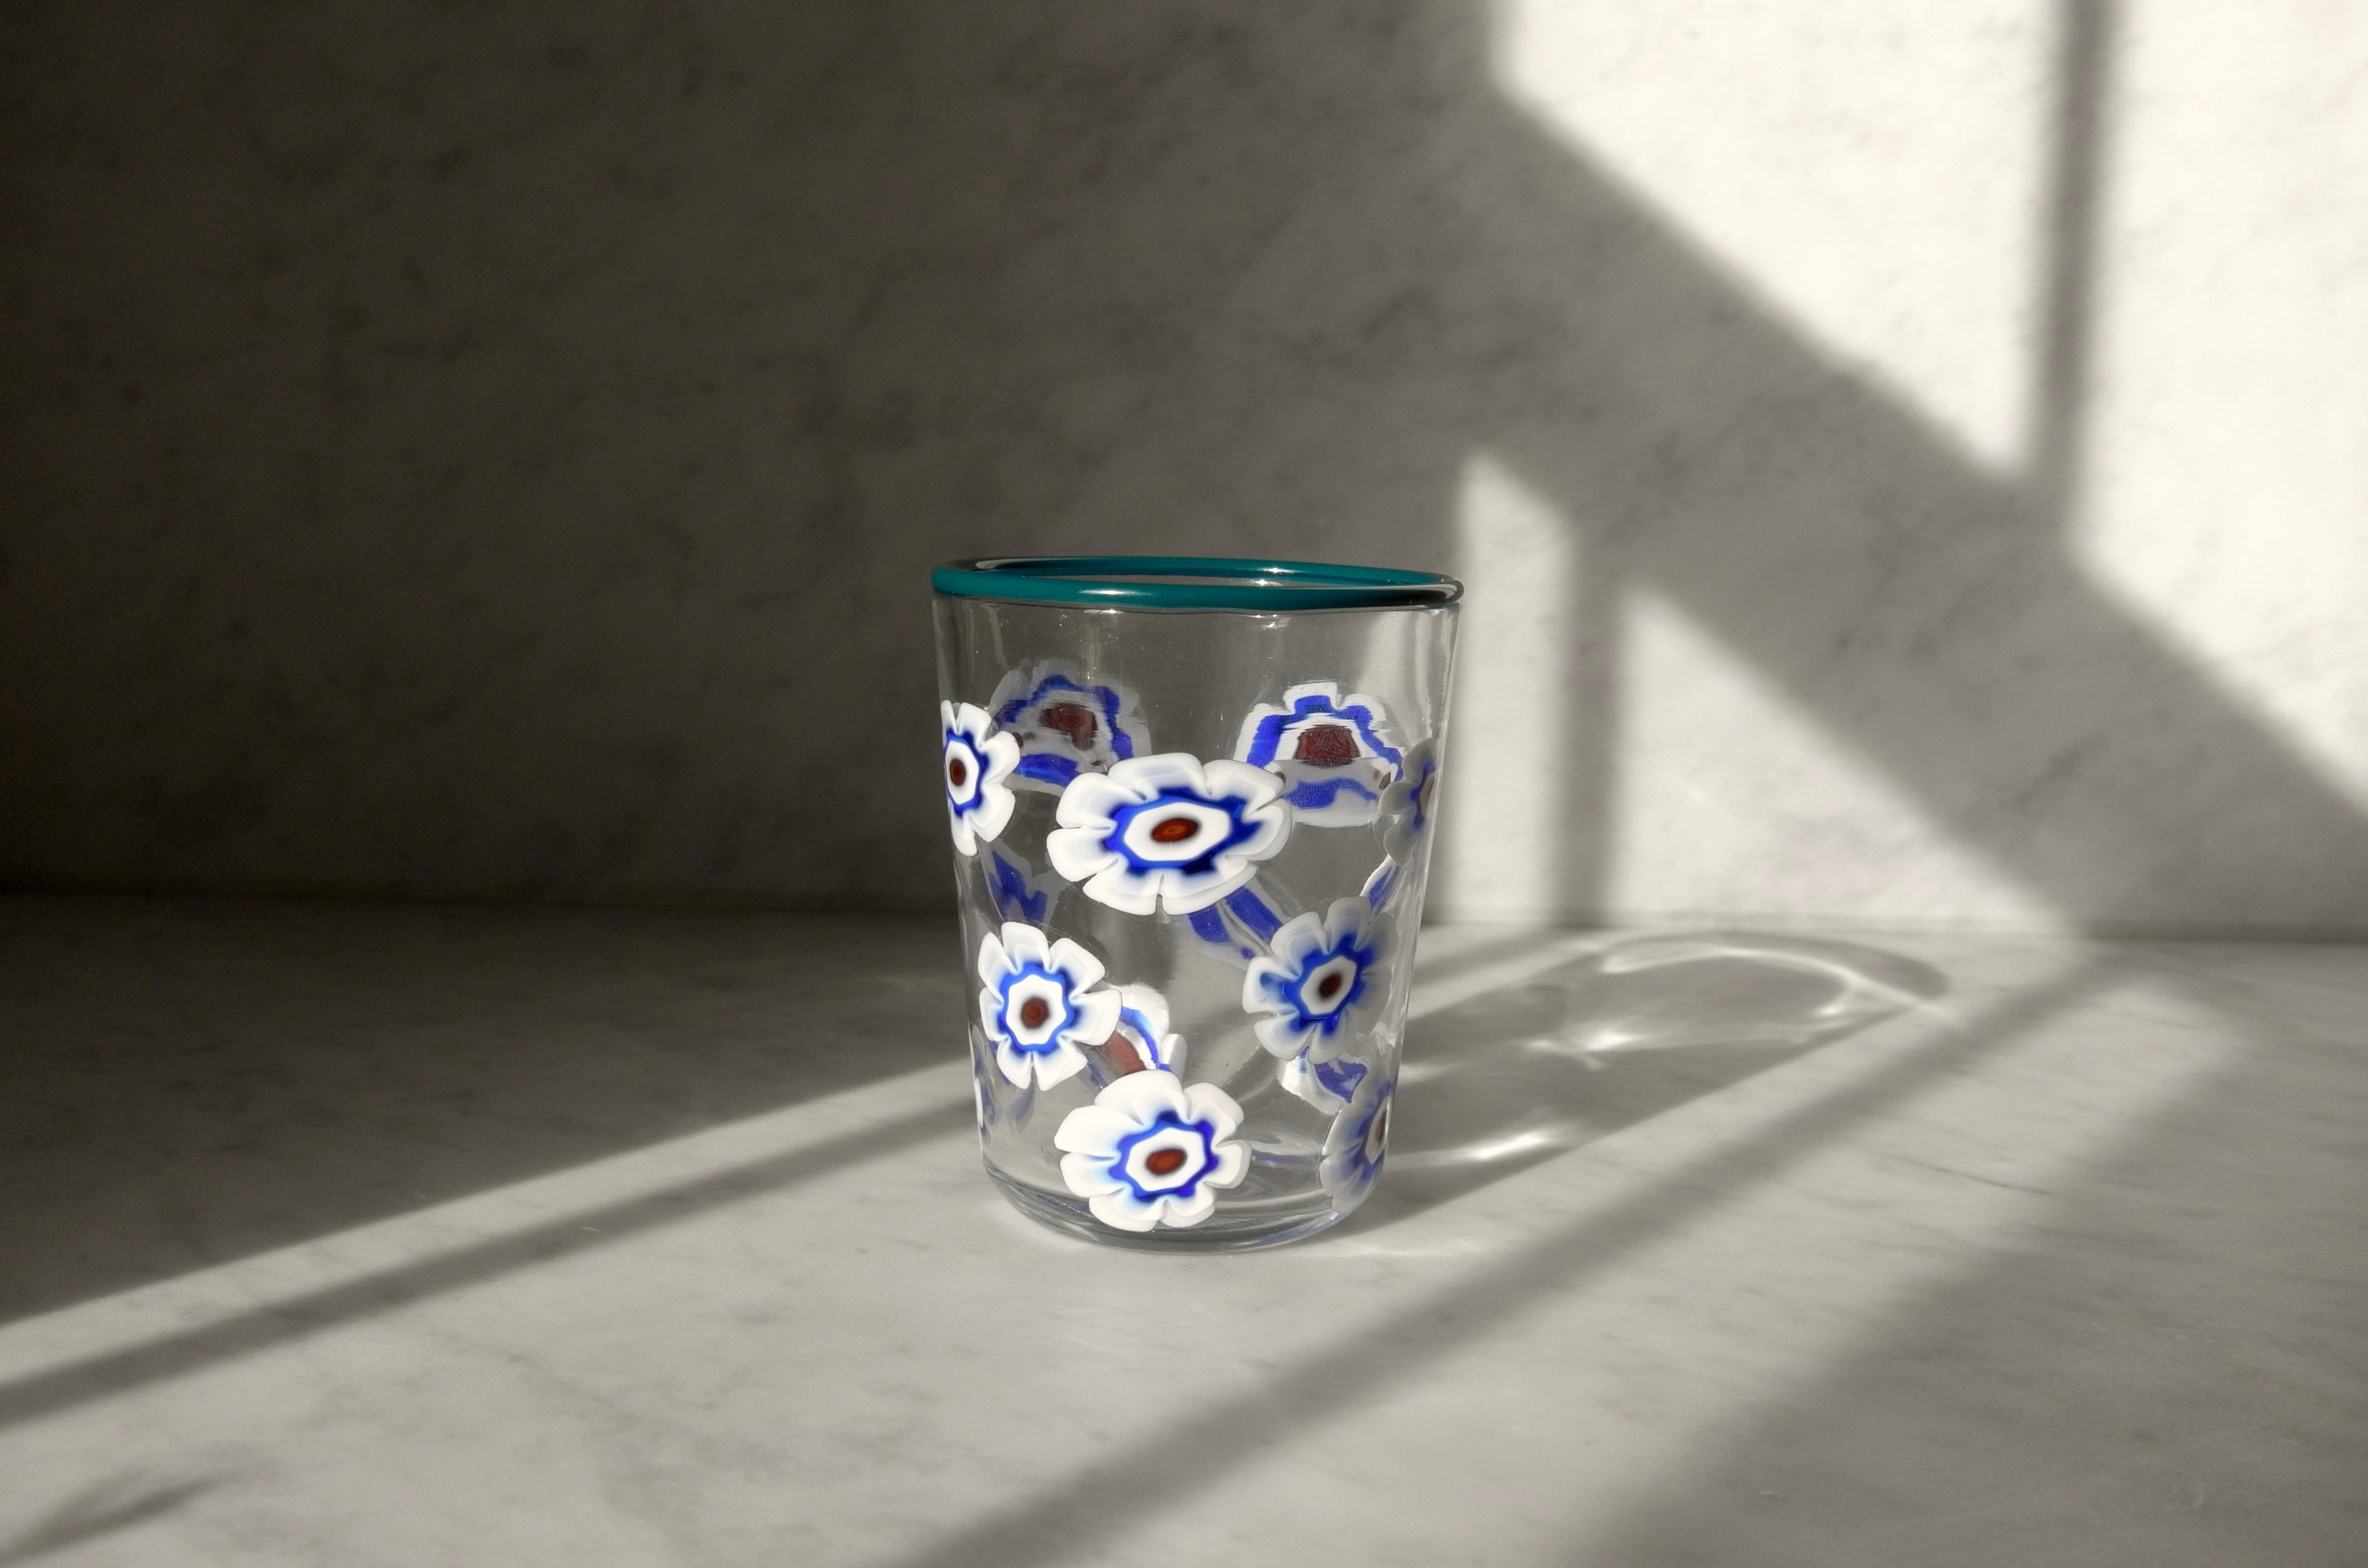 Majestic pieces of art should not be limited to being hung on our walls. Introducing Ledbury, a timelessly designed hand blown glass (goto), composed of Murrine (colored patterns and designs made in a glass cane). The perfect addition to any